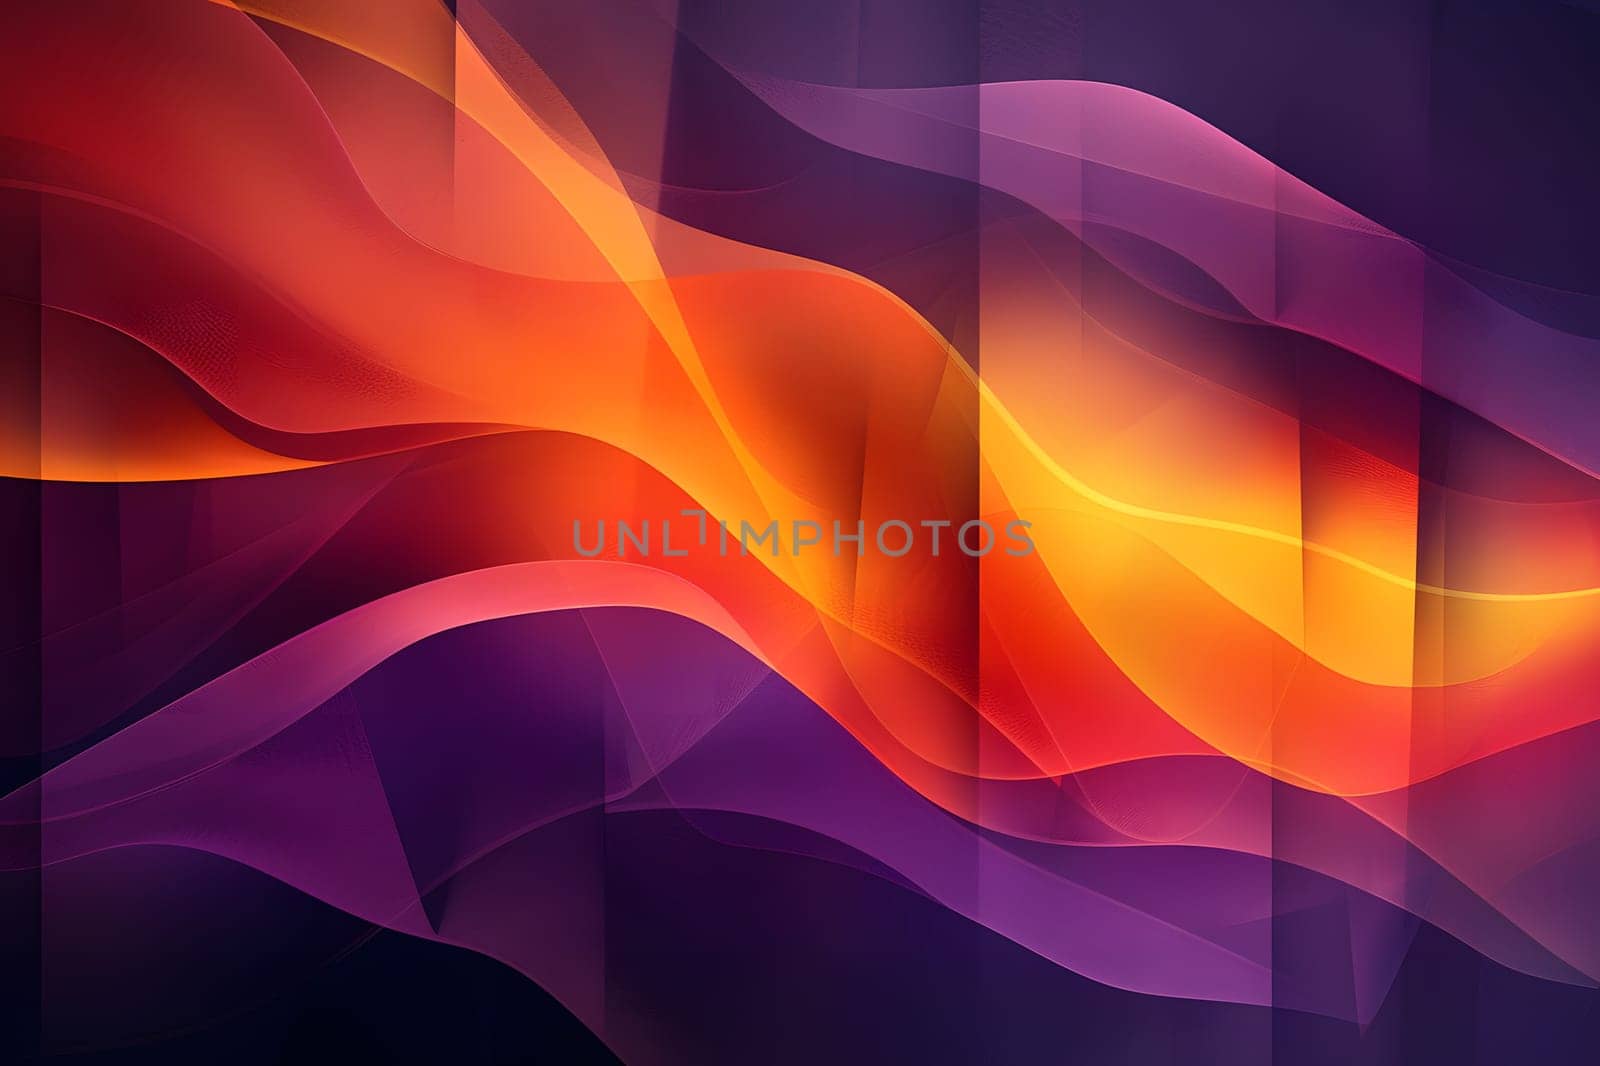 a purple and orange wave on a dark background by Nadtochiy